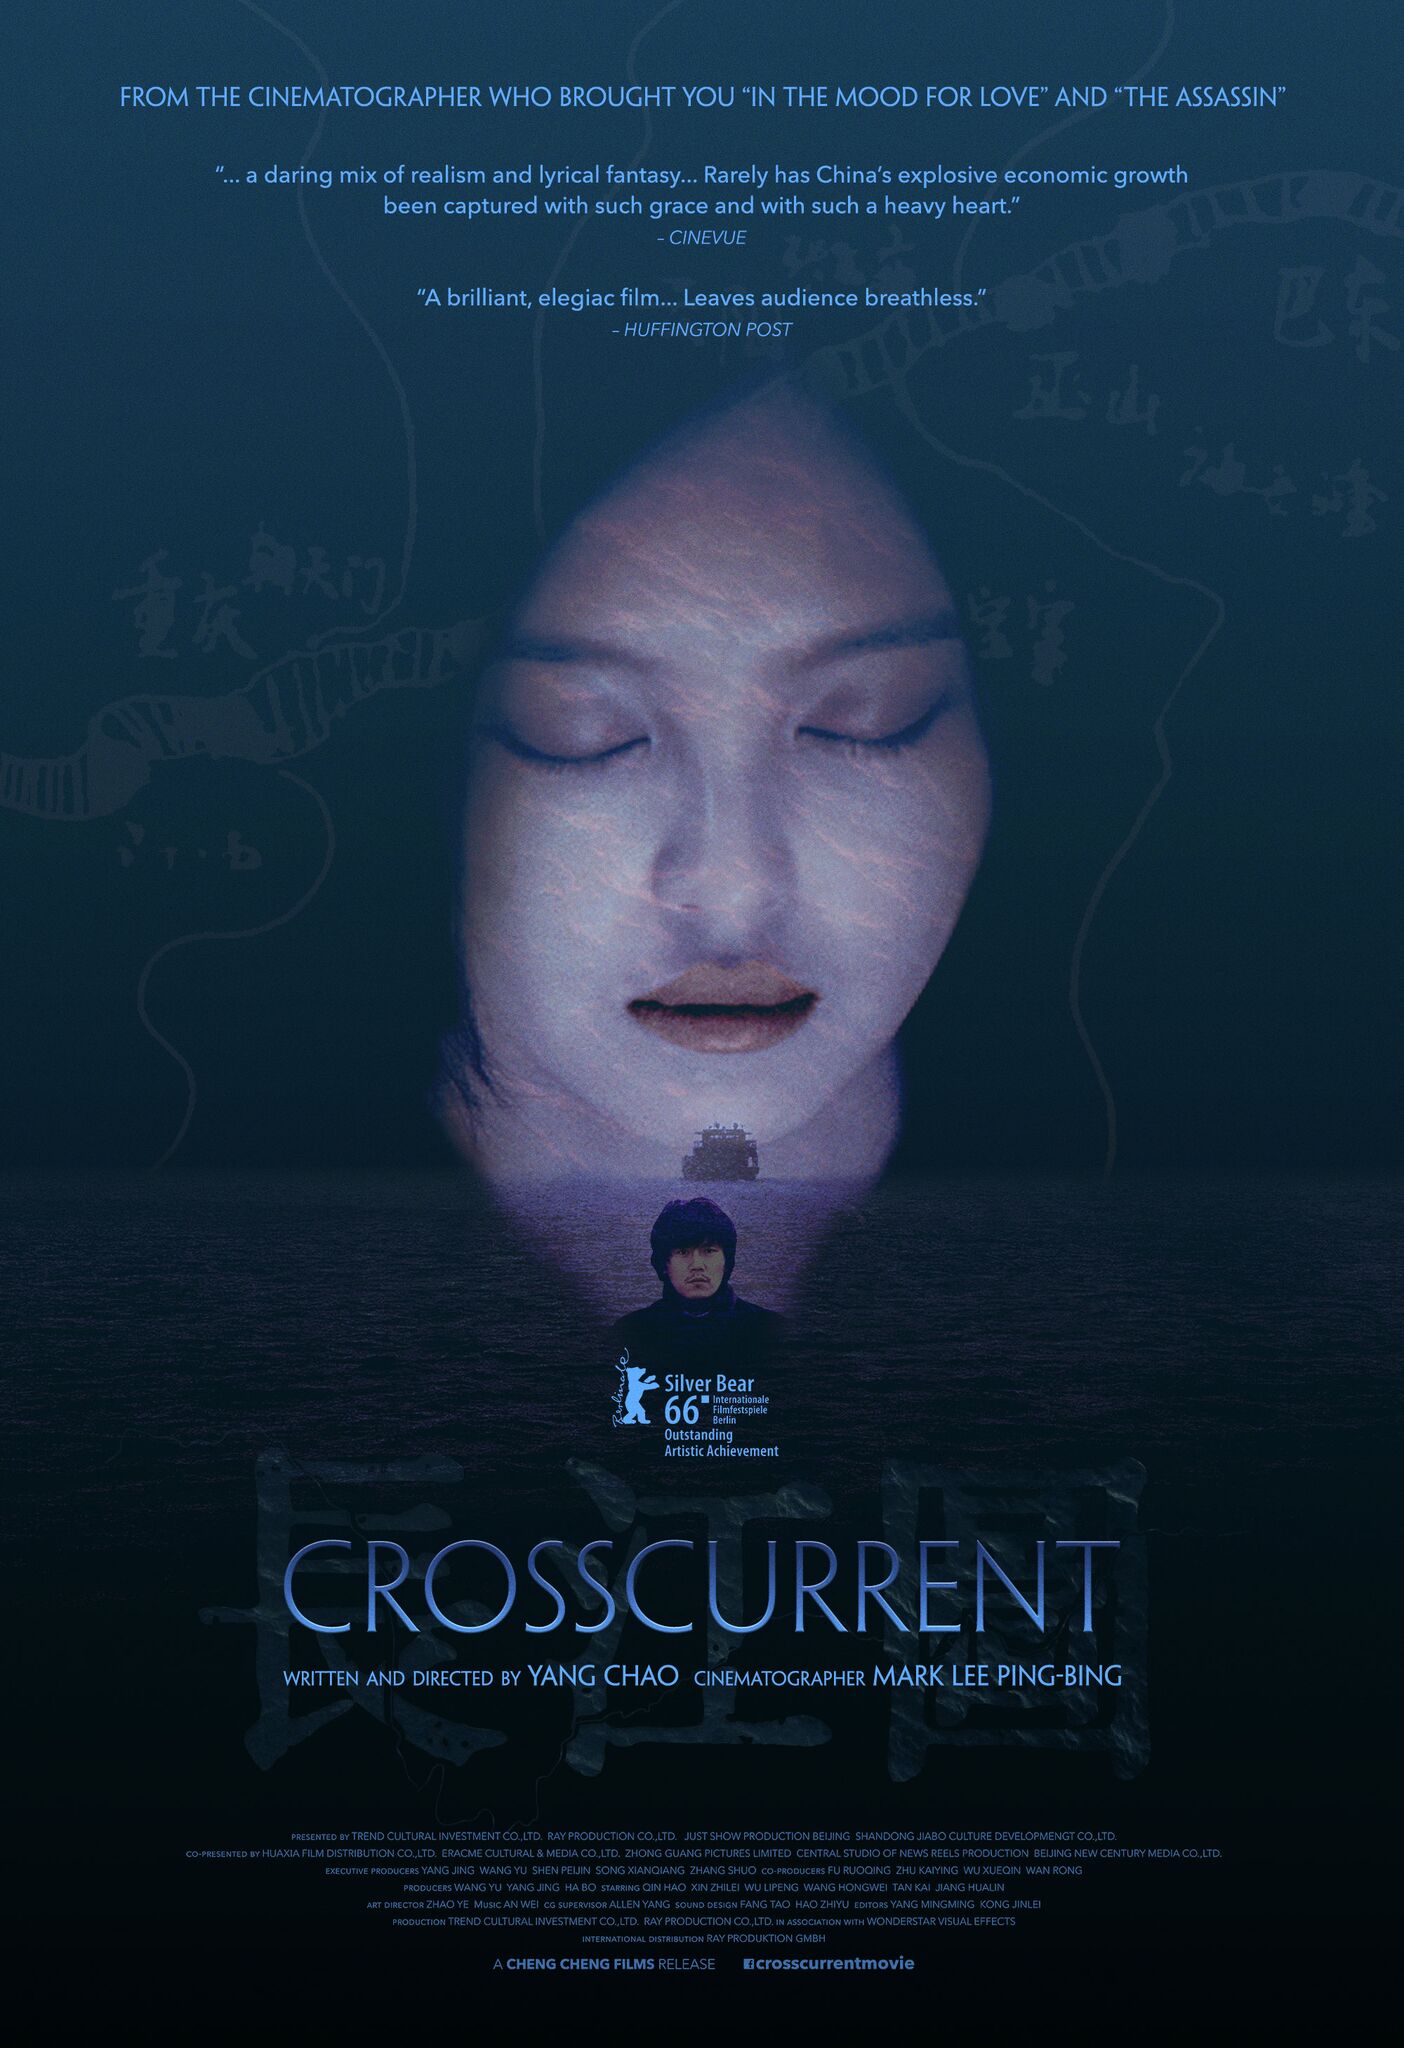 Crosscurrent Image